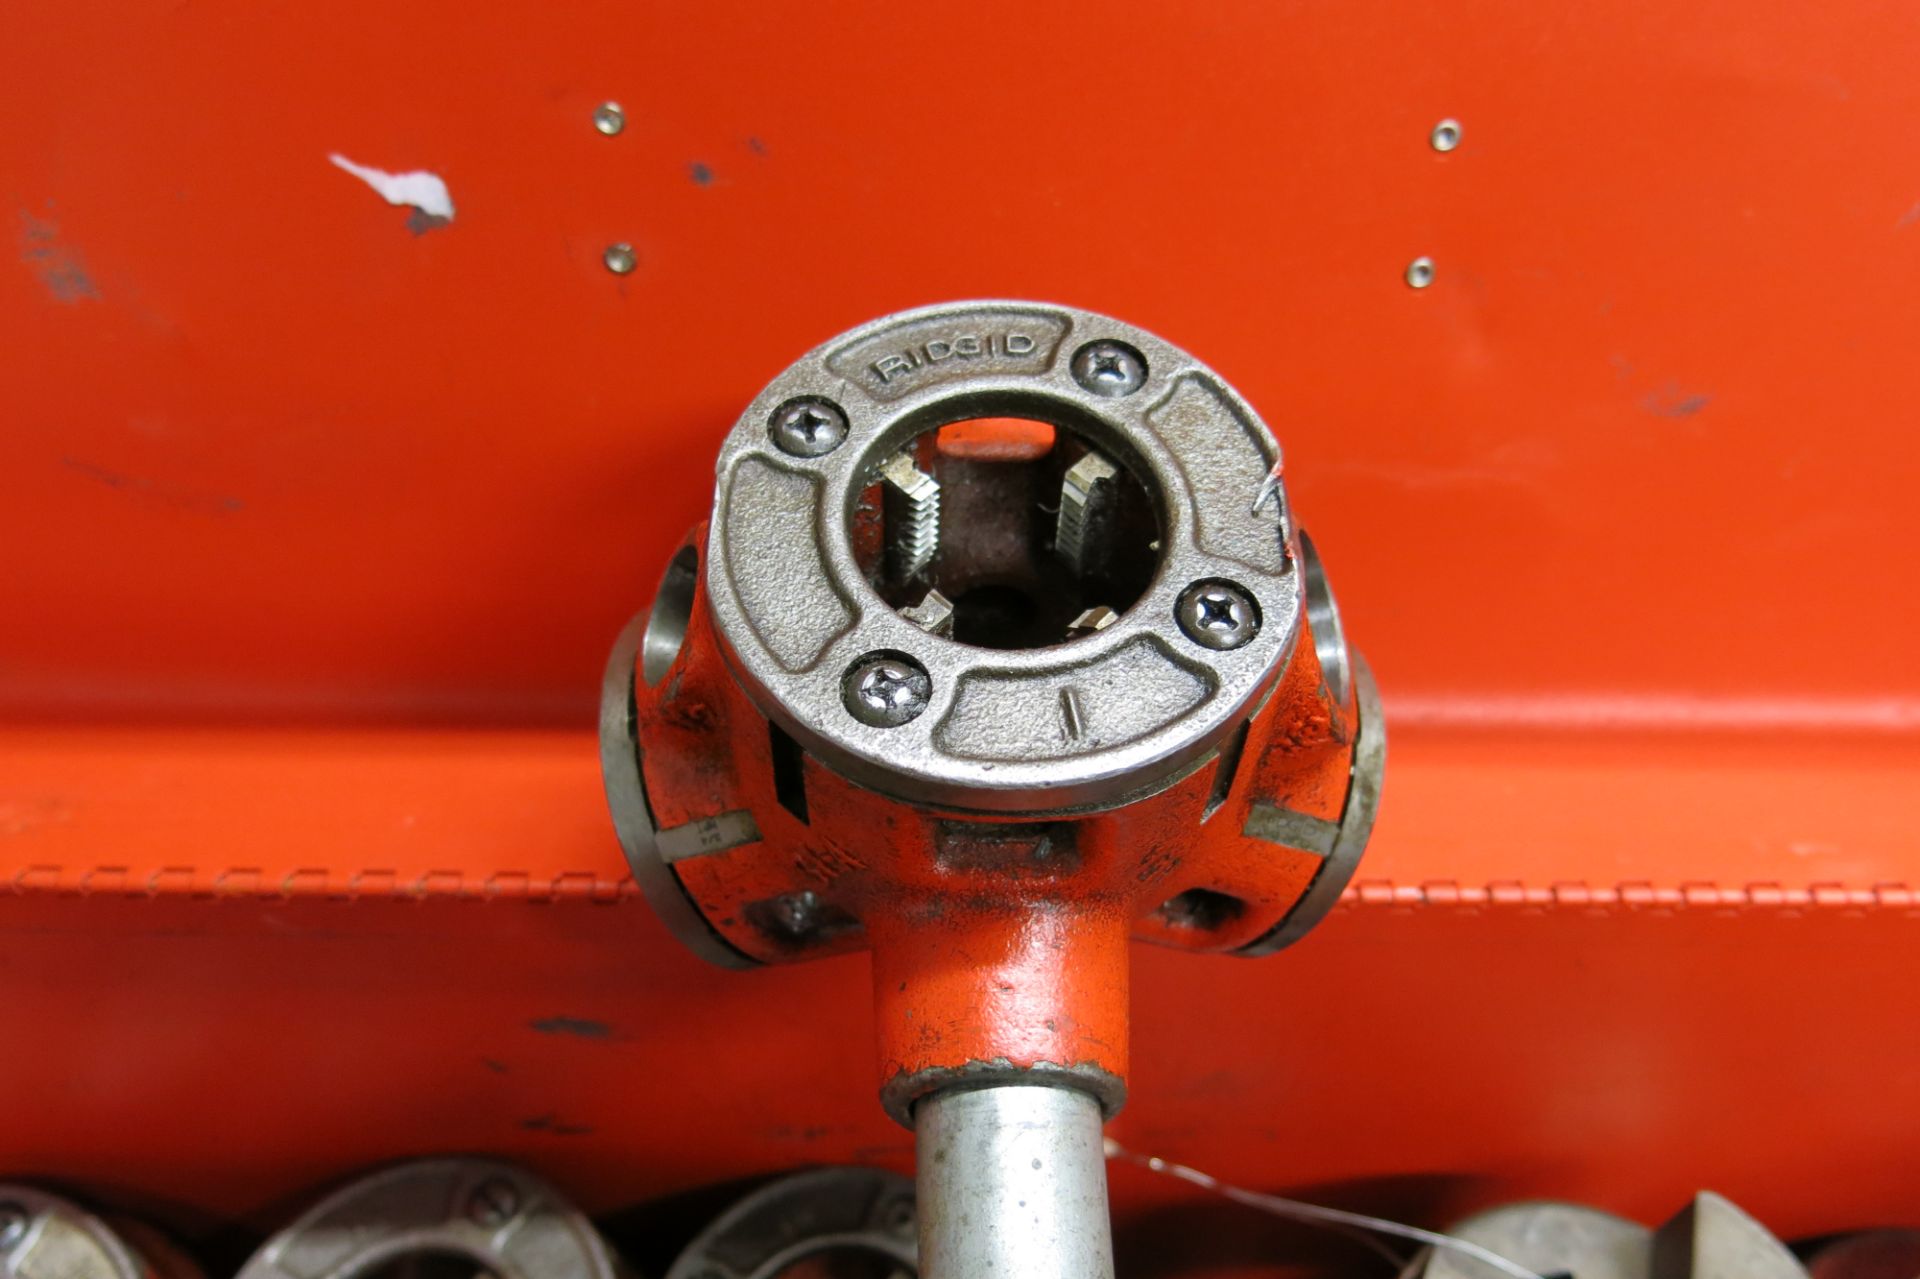 RIDGID PIPE THREADER (1/2", 3/8", 3/4", 1", 1.25", 1.5") AND PIPE CUTTER - Image 3 of 6